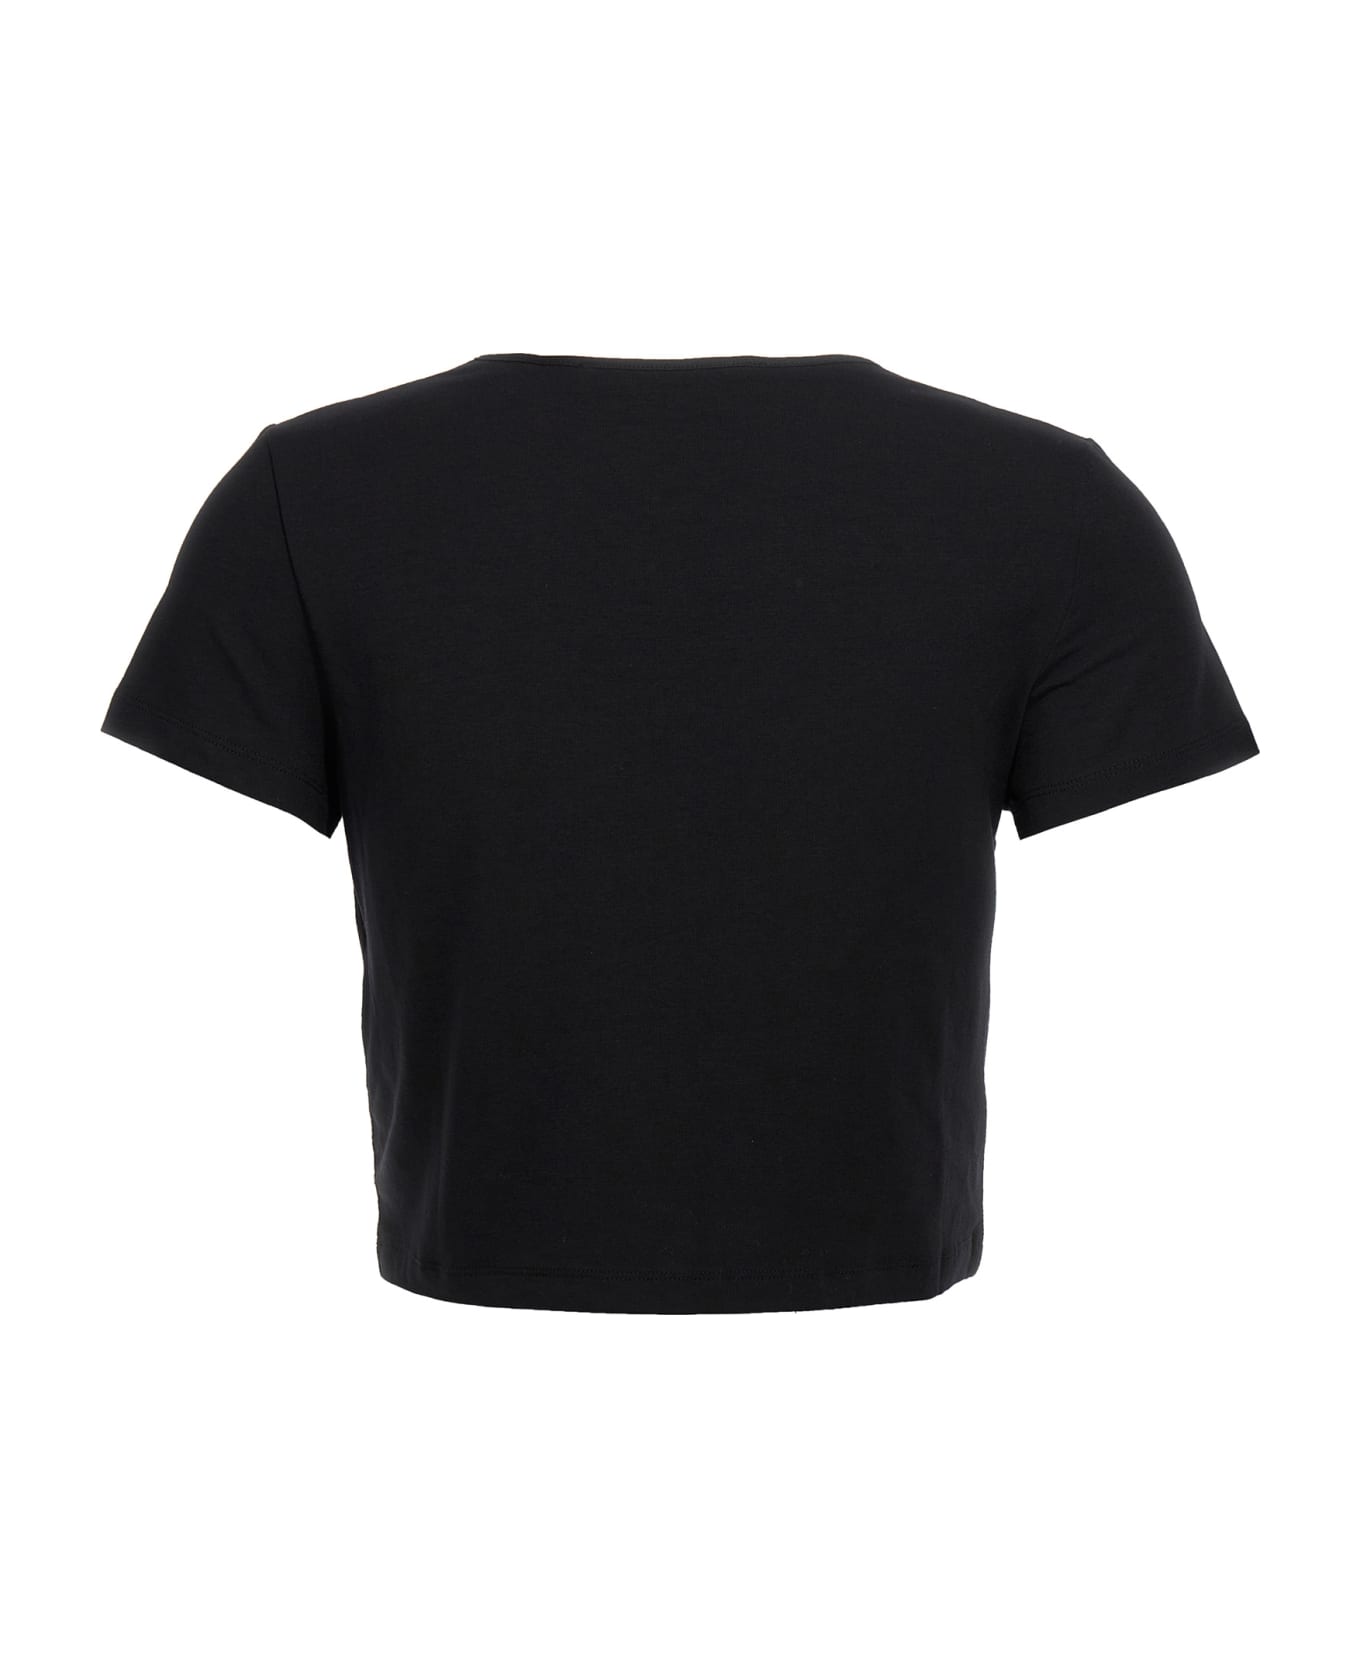 Rotate by Birger Christensen T-shirt 'may Top' - Black   Tシャツ